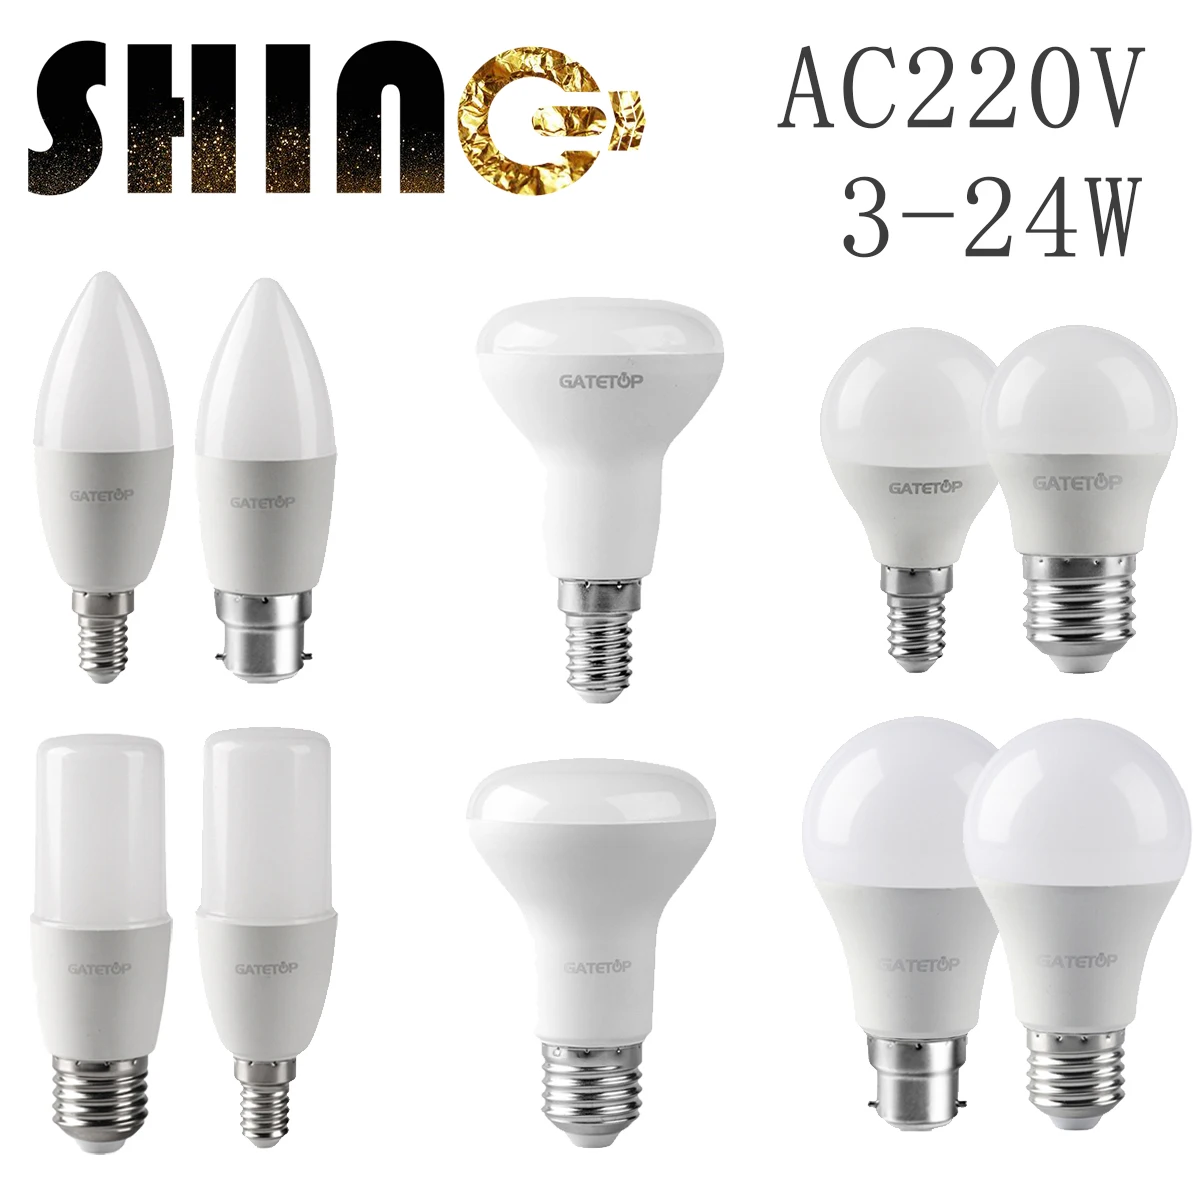 

LED Energy Saving Bulb AC220V E14 E27 B22 3w-24w 3000K 4000K 6000K Lamp With Ce Rohs For Home Office Interior Decoration